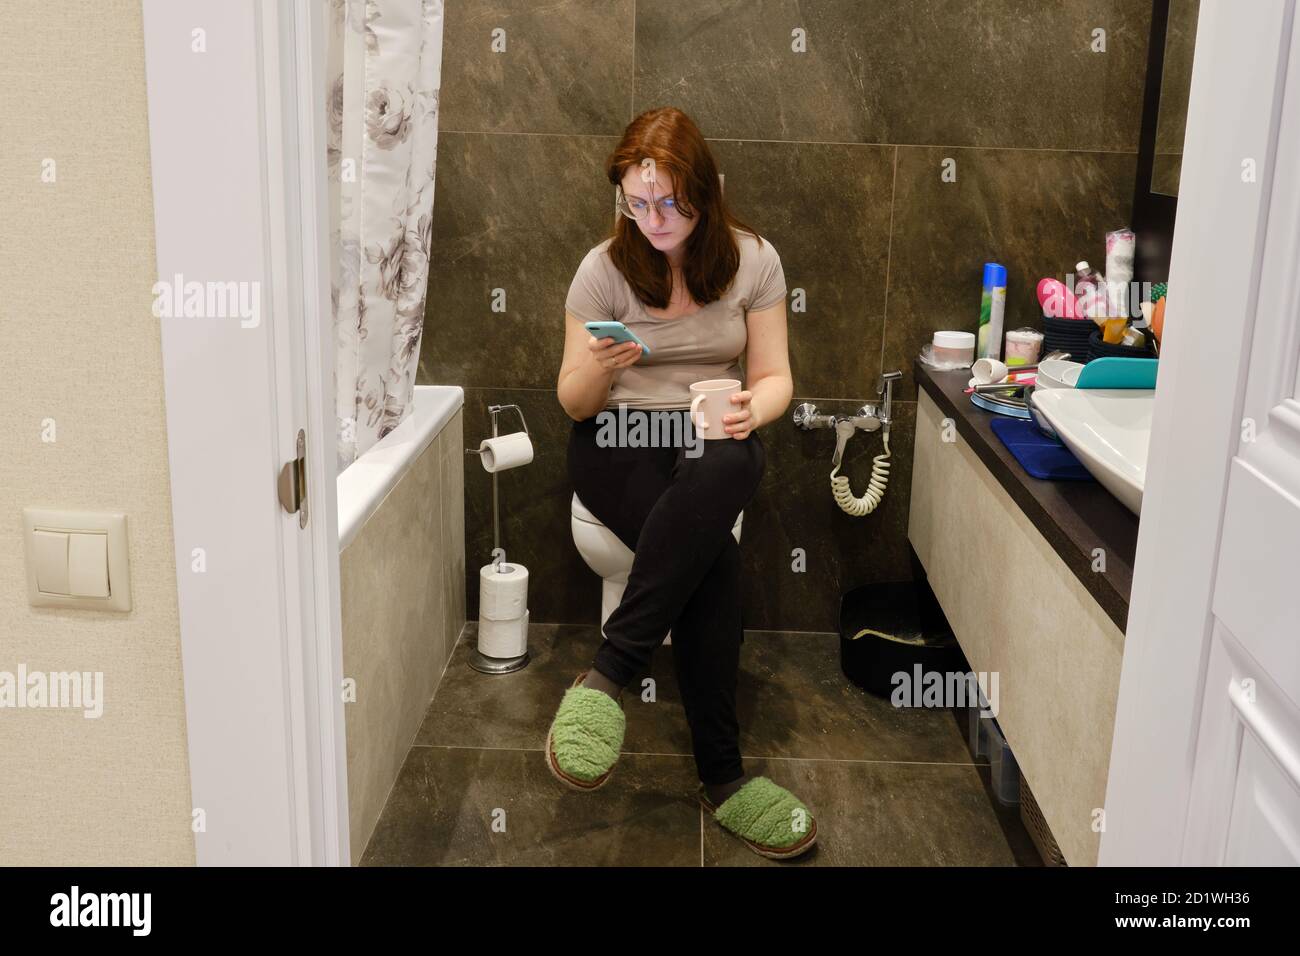 A young woman looks at her phone while sitting on the toilet in the bathroom. Lifestyle photos and casual life Stock Photo